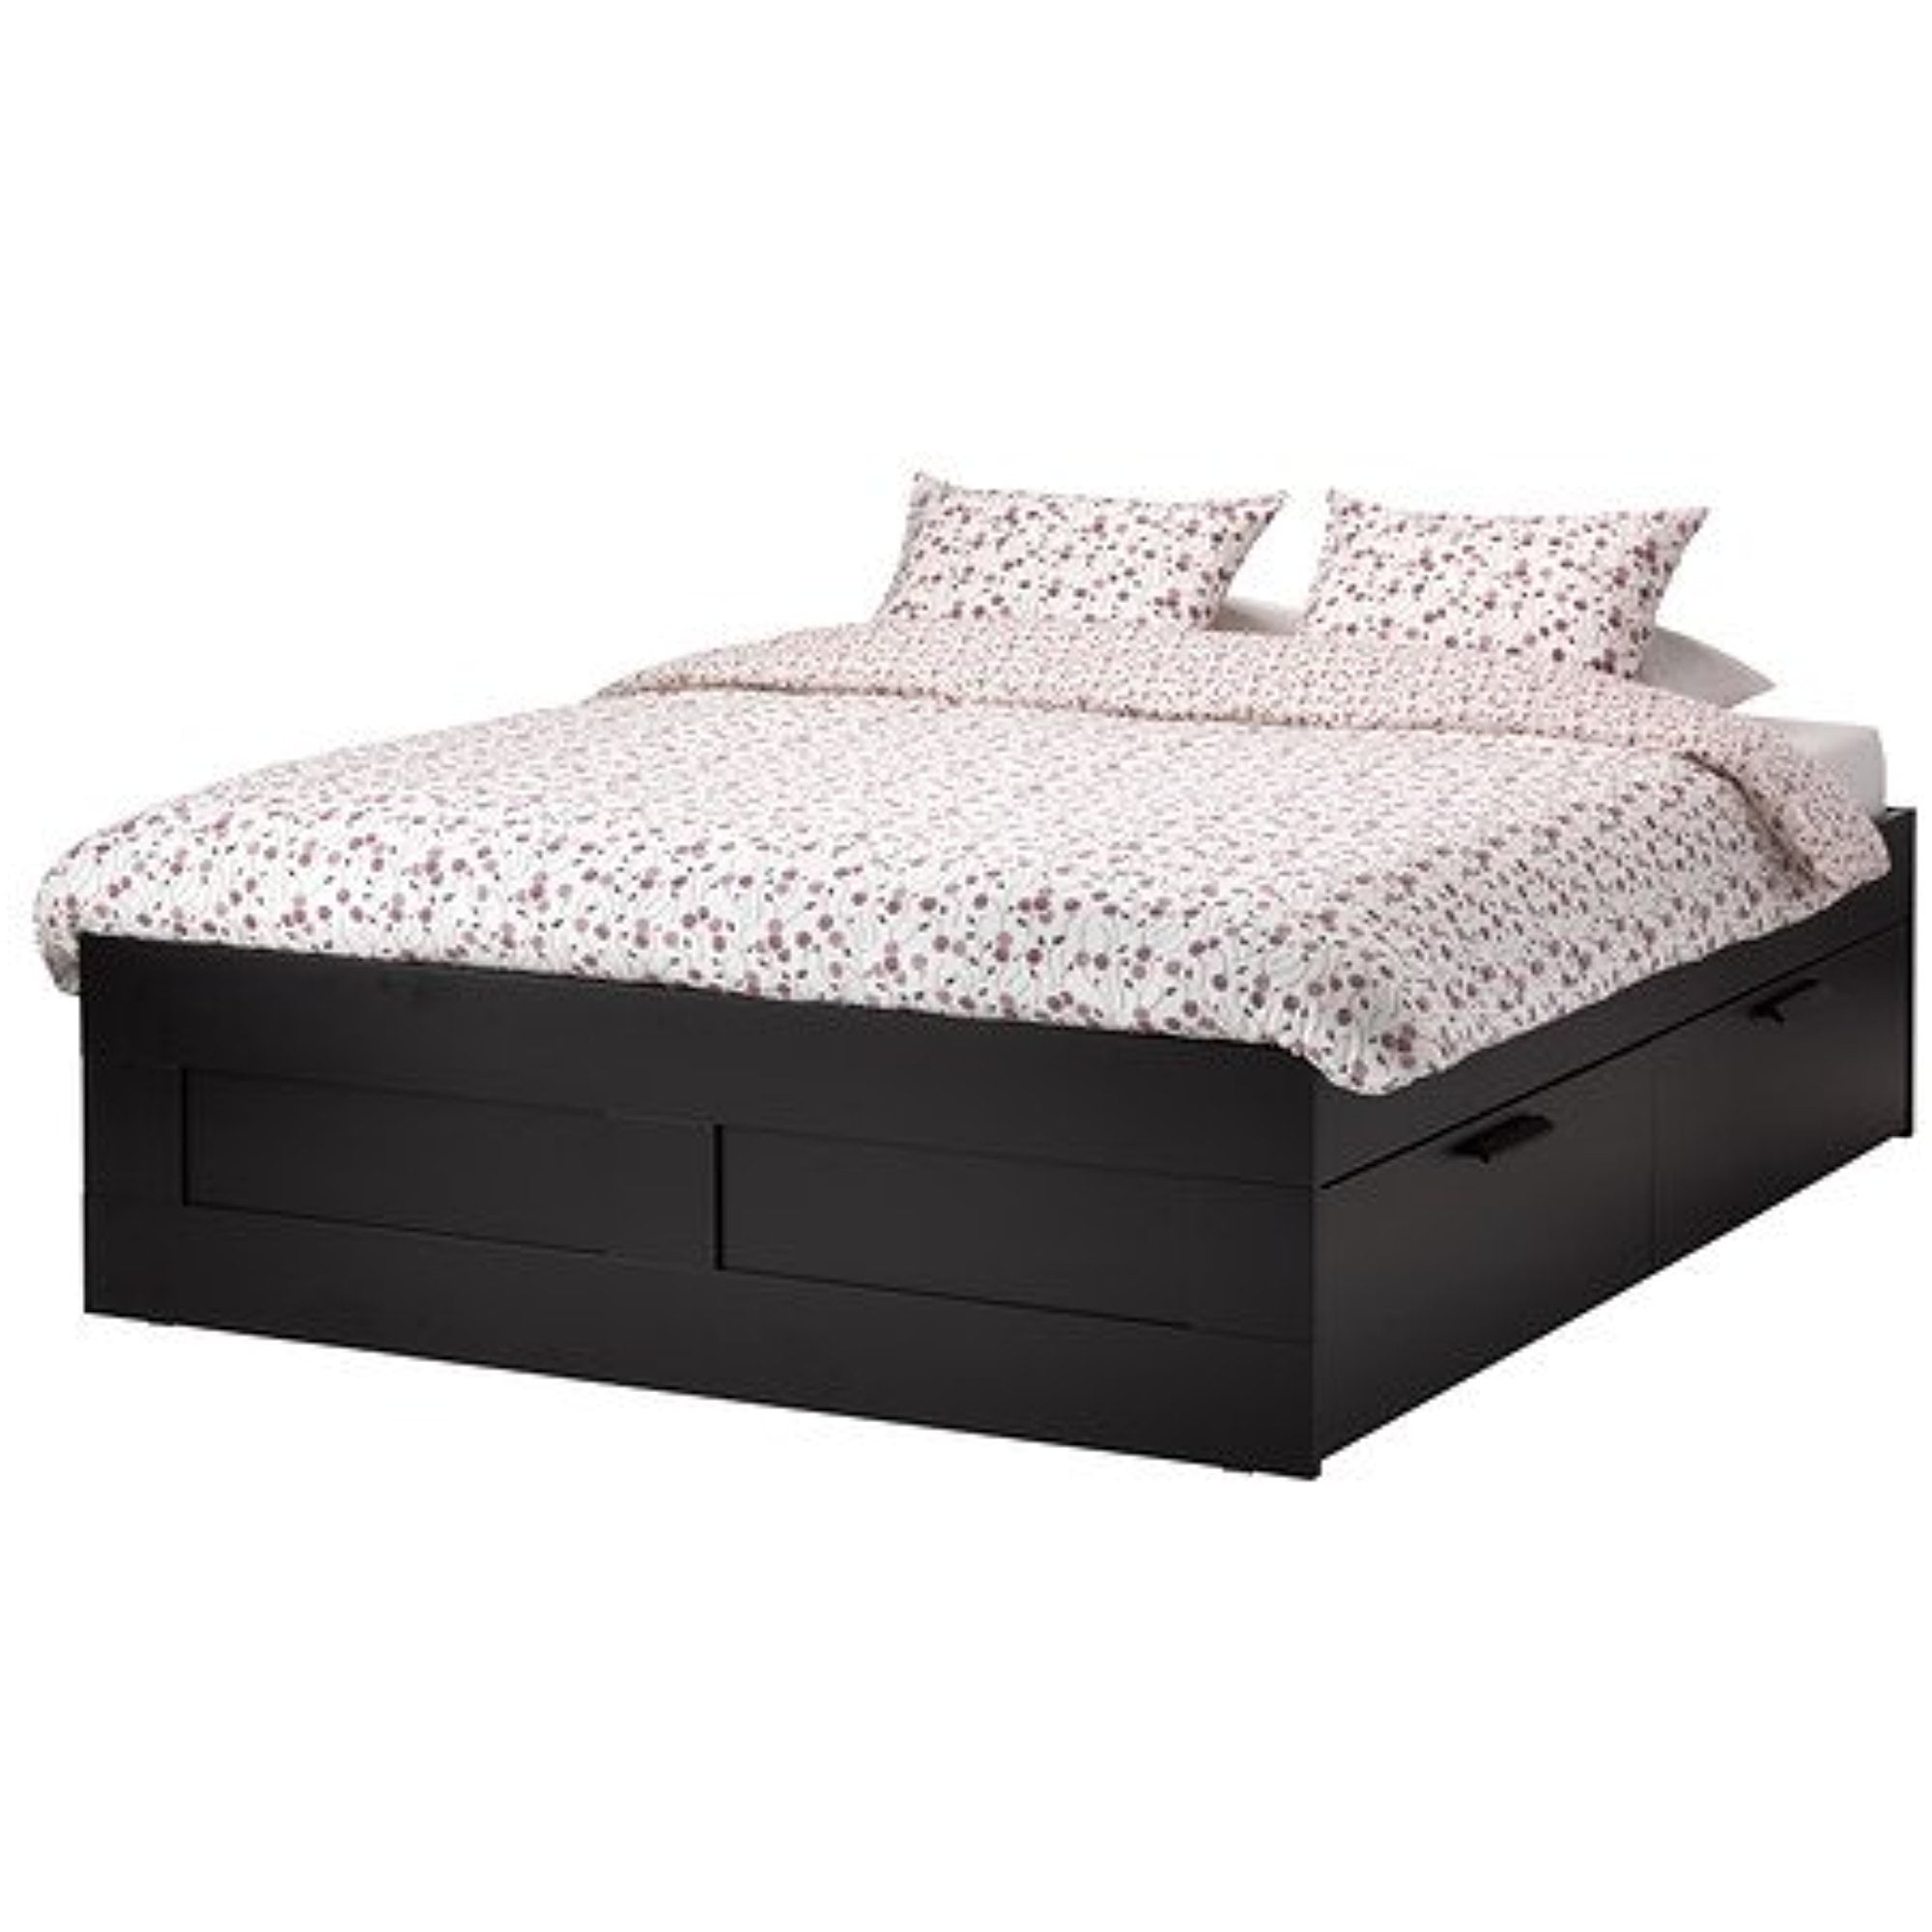 Ikea Queen Size Bed Frame With Storage, Ikea Bed Frame Box Size